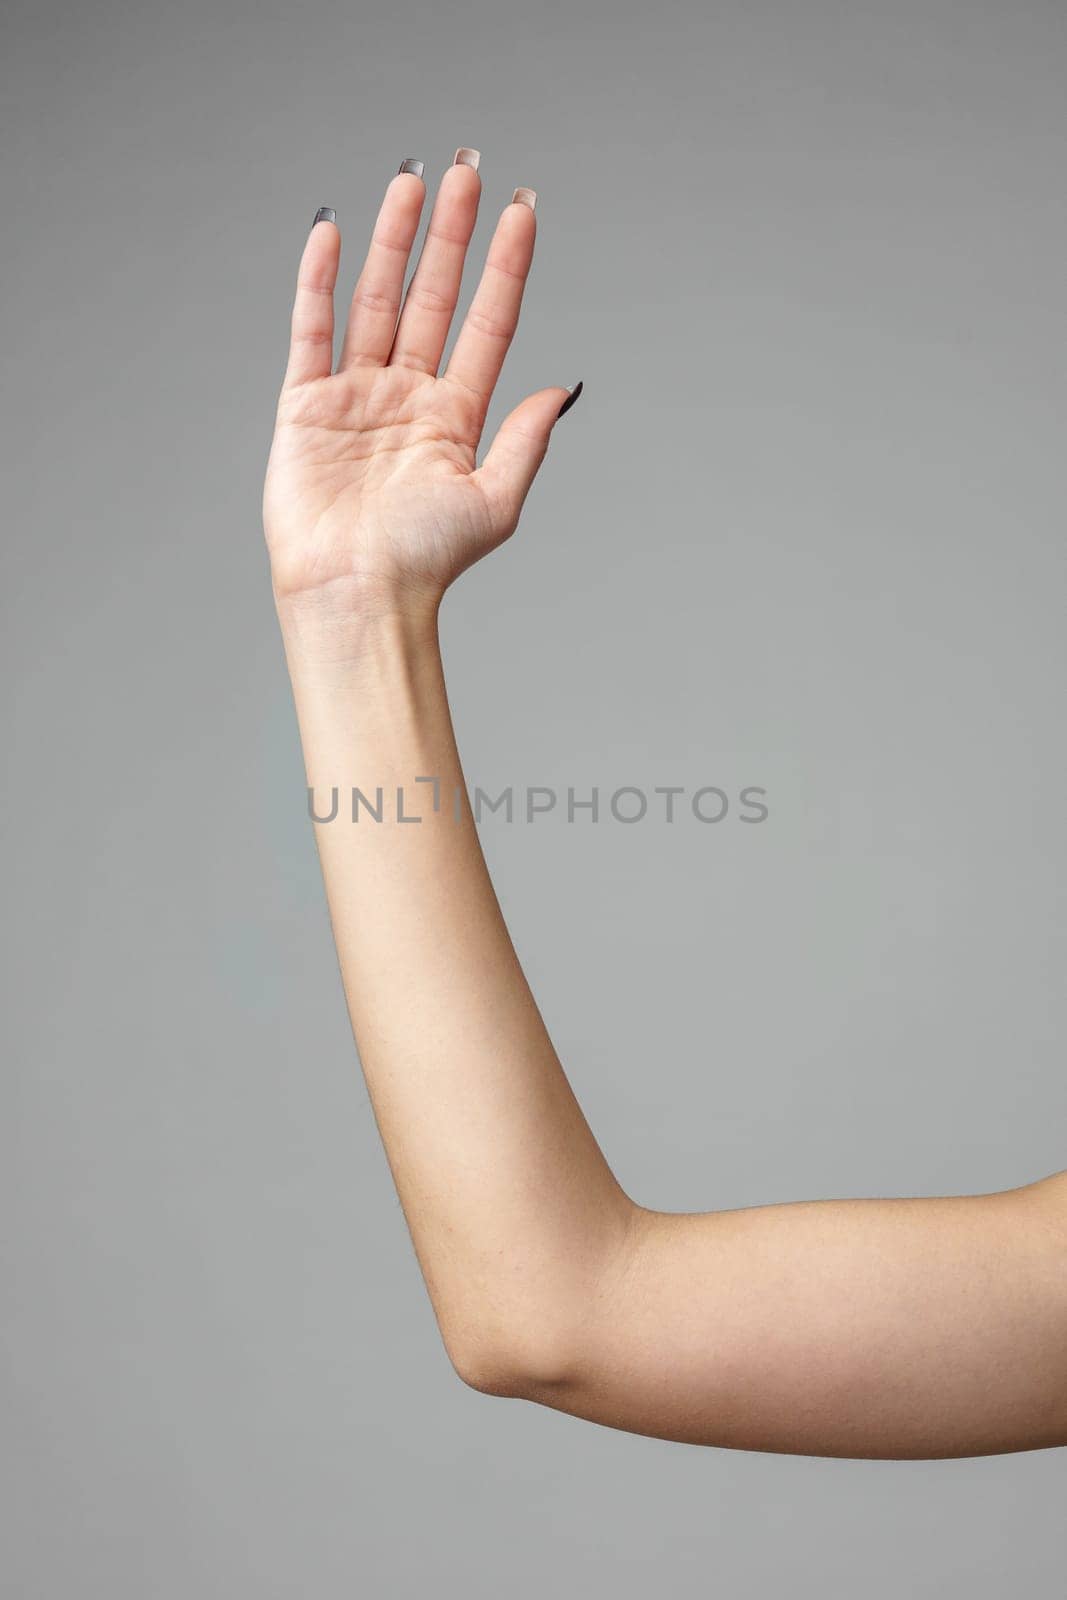 An individuals left hand is raised up against a neutral gray backdrop, displaying an open palm with fingers extended and slightly apart, possibly conveying a sign, signal, or nonverbal communication.